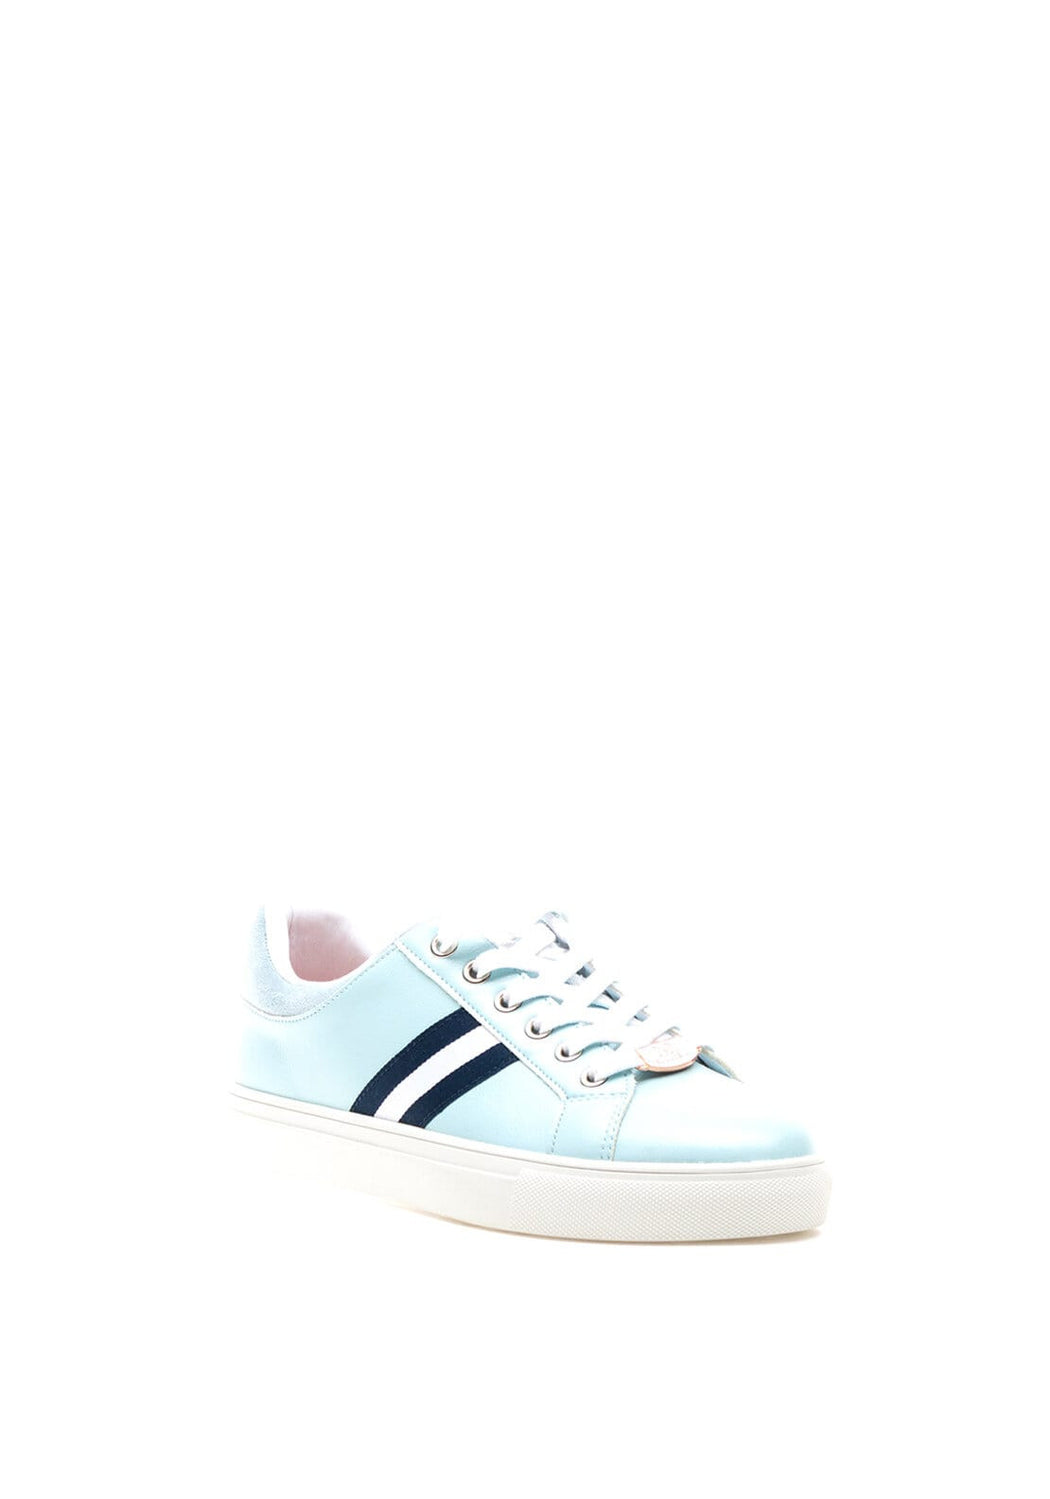 Vicky rr blue trainer